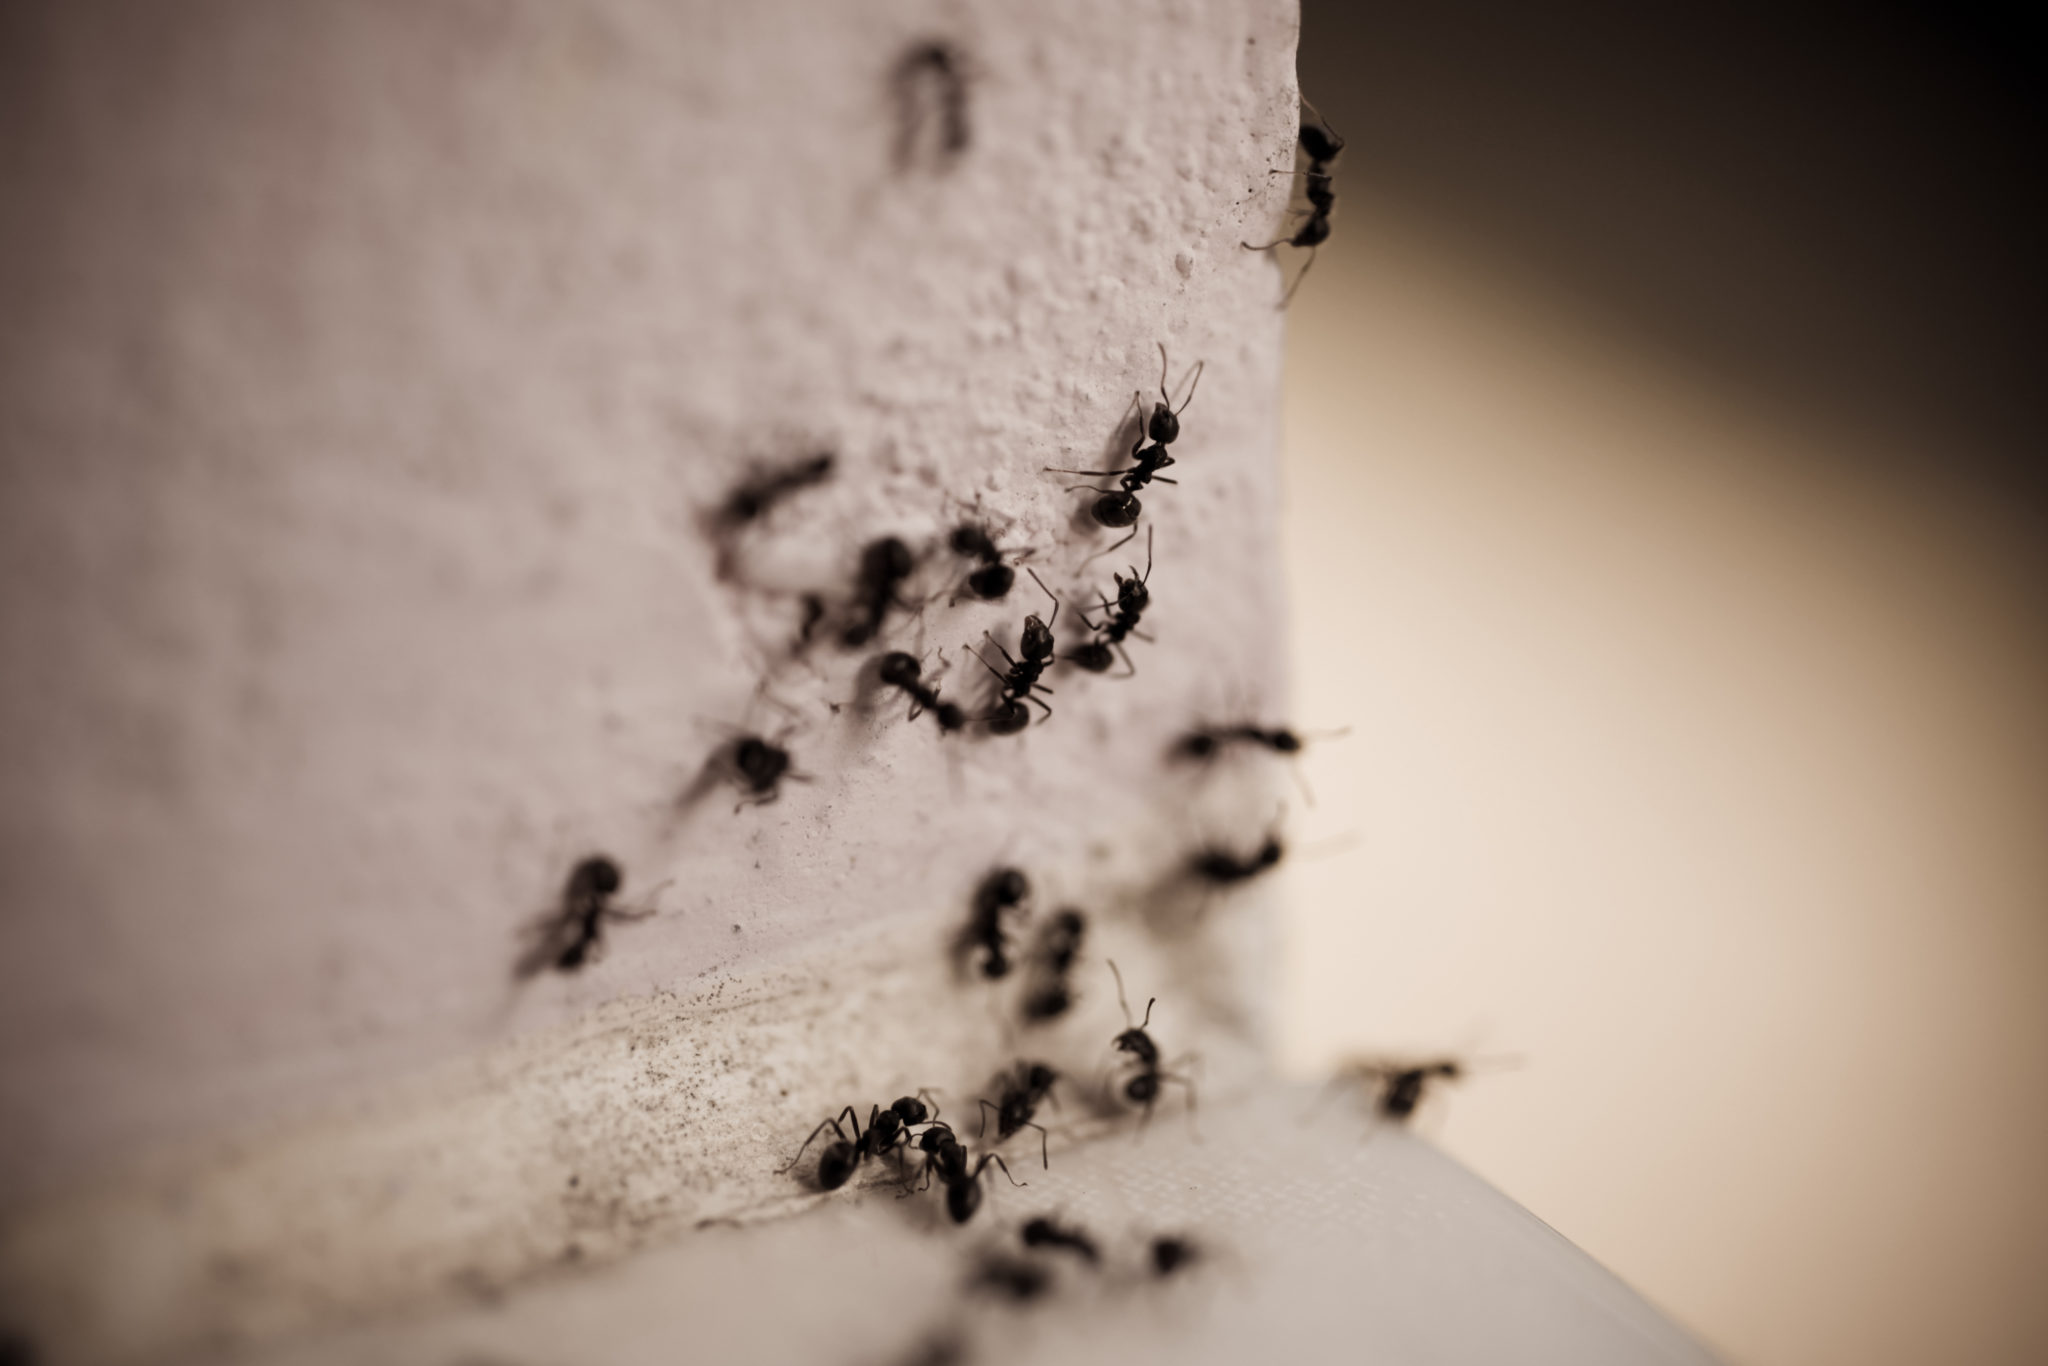 Ants infestation in Cairns home